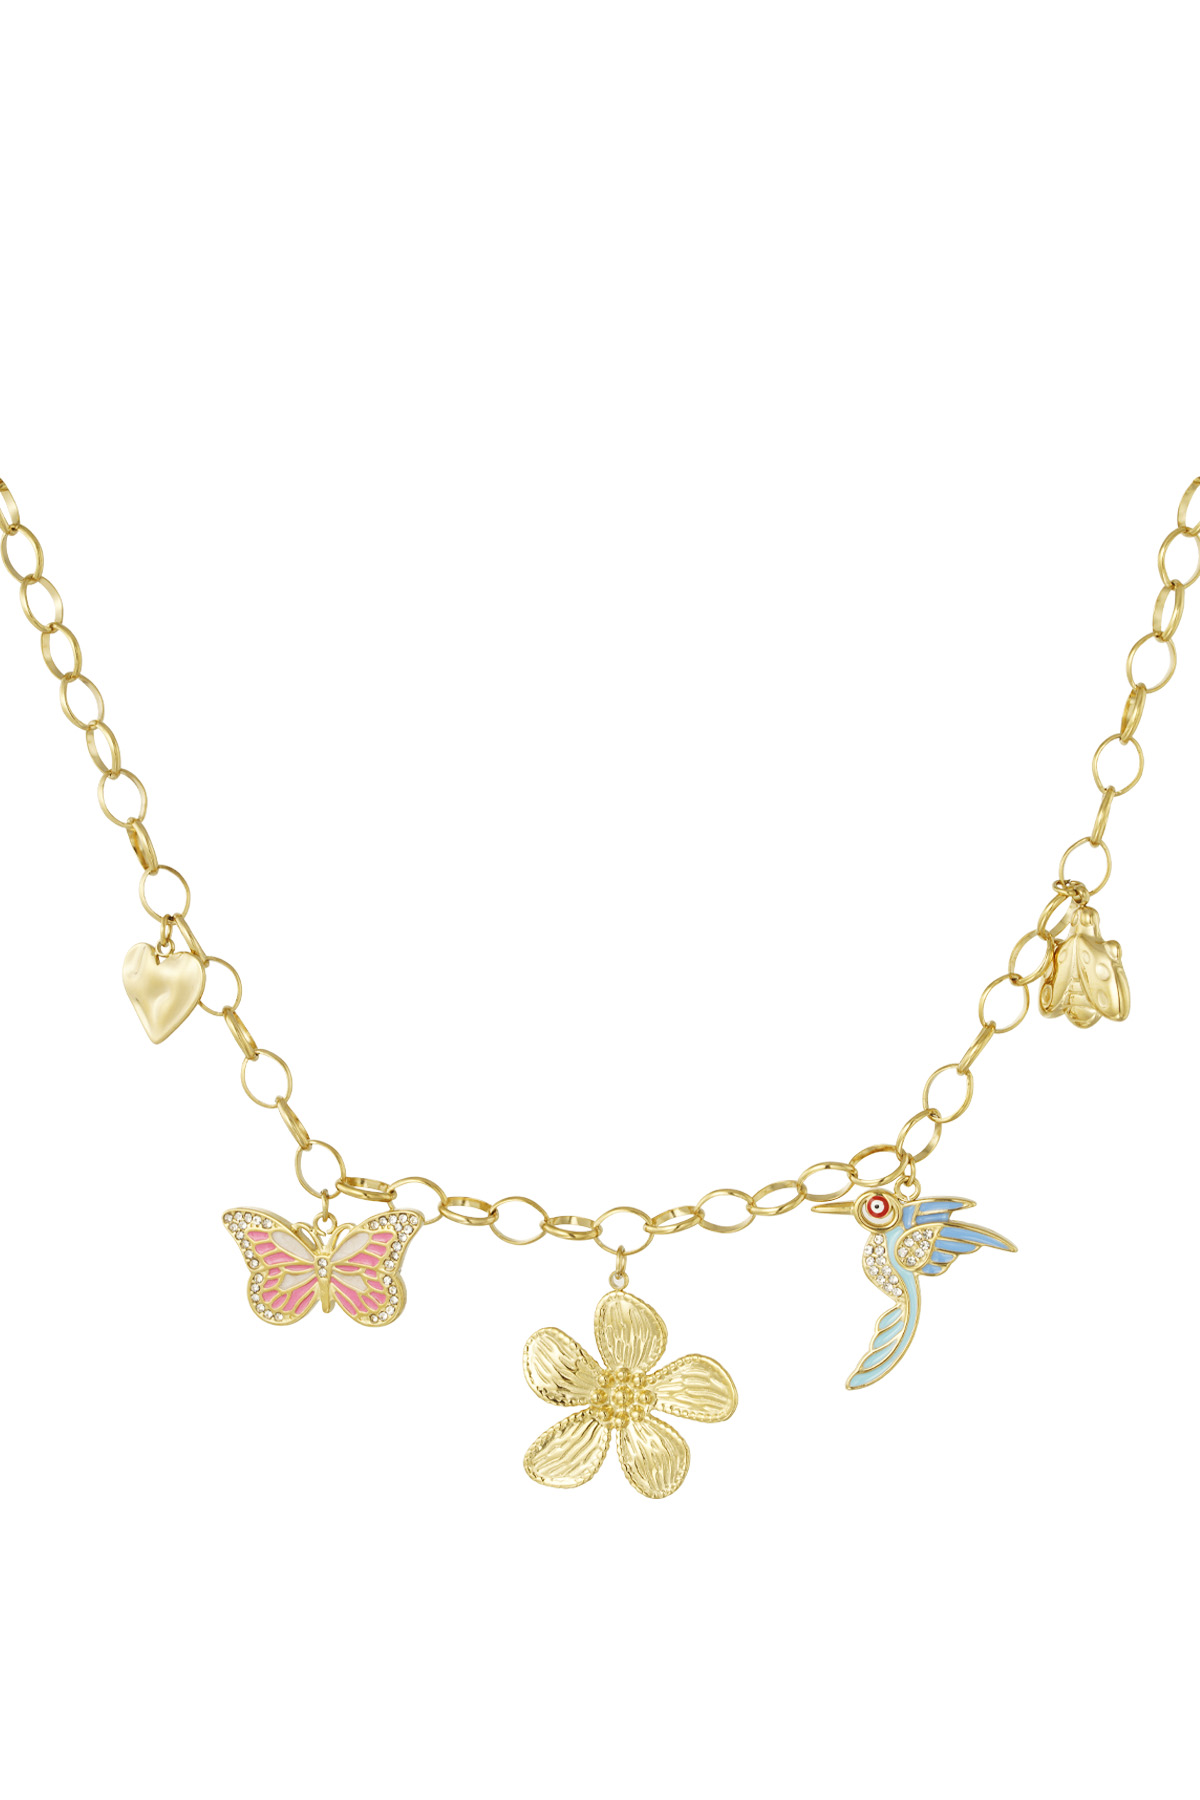 Charm necklace wild floral - gold